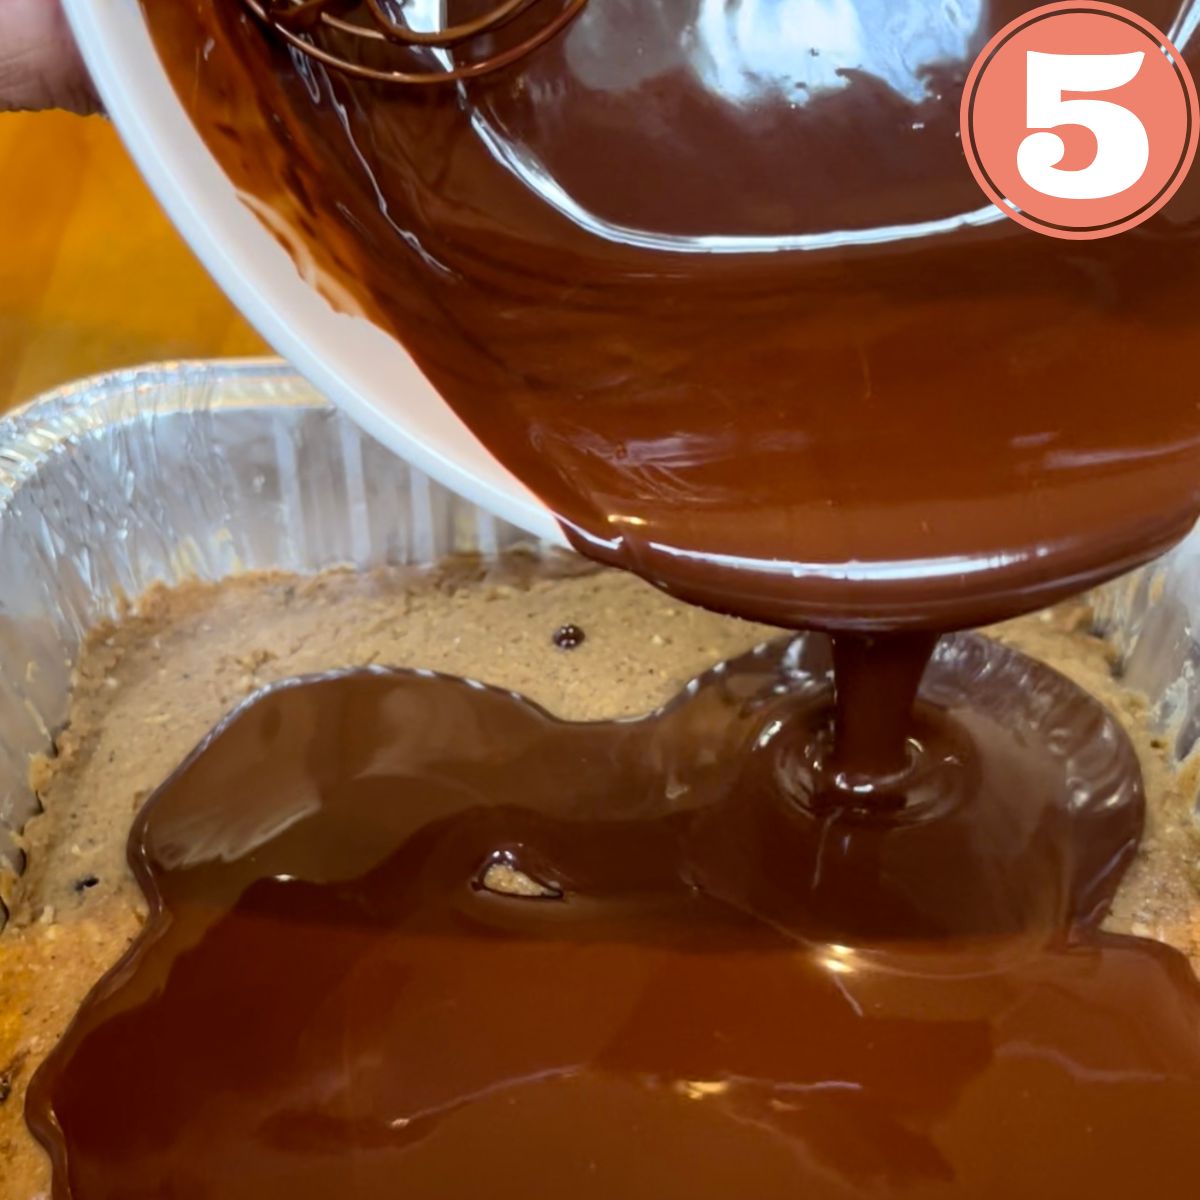 Melted chocolate being poured over cookie dough in a pan